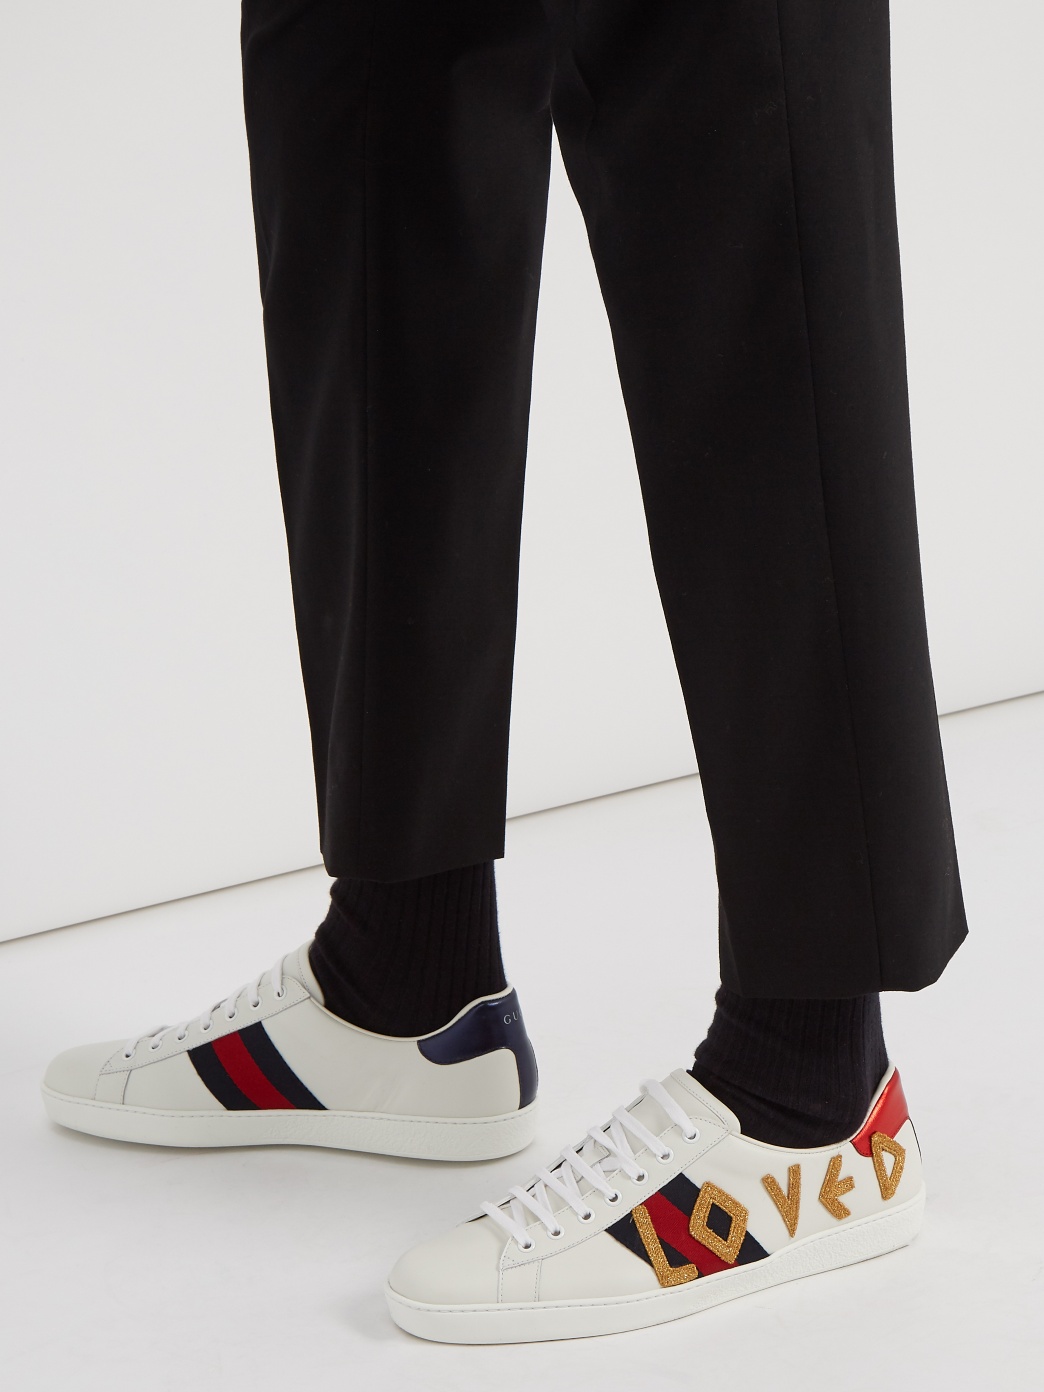 New Gucci Items Drops At Matches Fashion – PAUSE Online | Men's Fashion ...